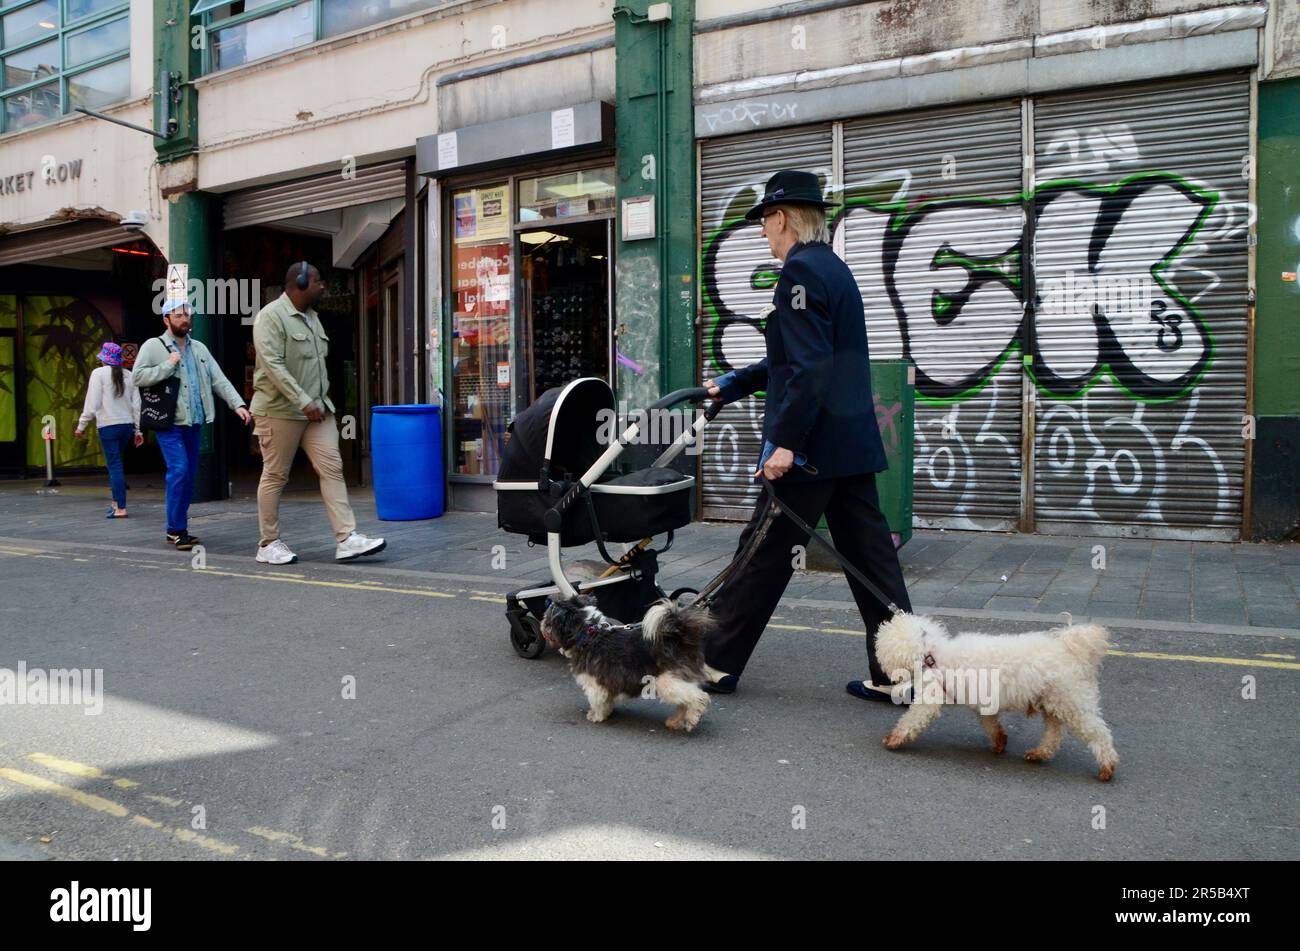 eccentric suited white man with dogs; brixton SW9 market with stalls shops restaurants bars etc in arcade and on street in lambeth london england great britain; brixton village market row and brixton village Stock Photo